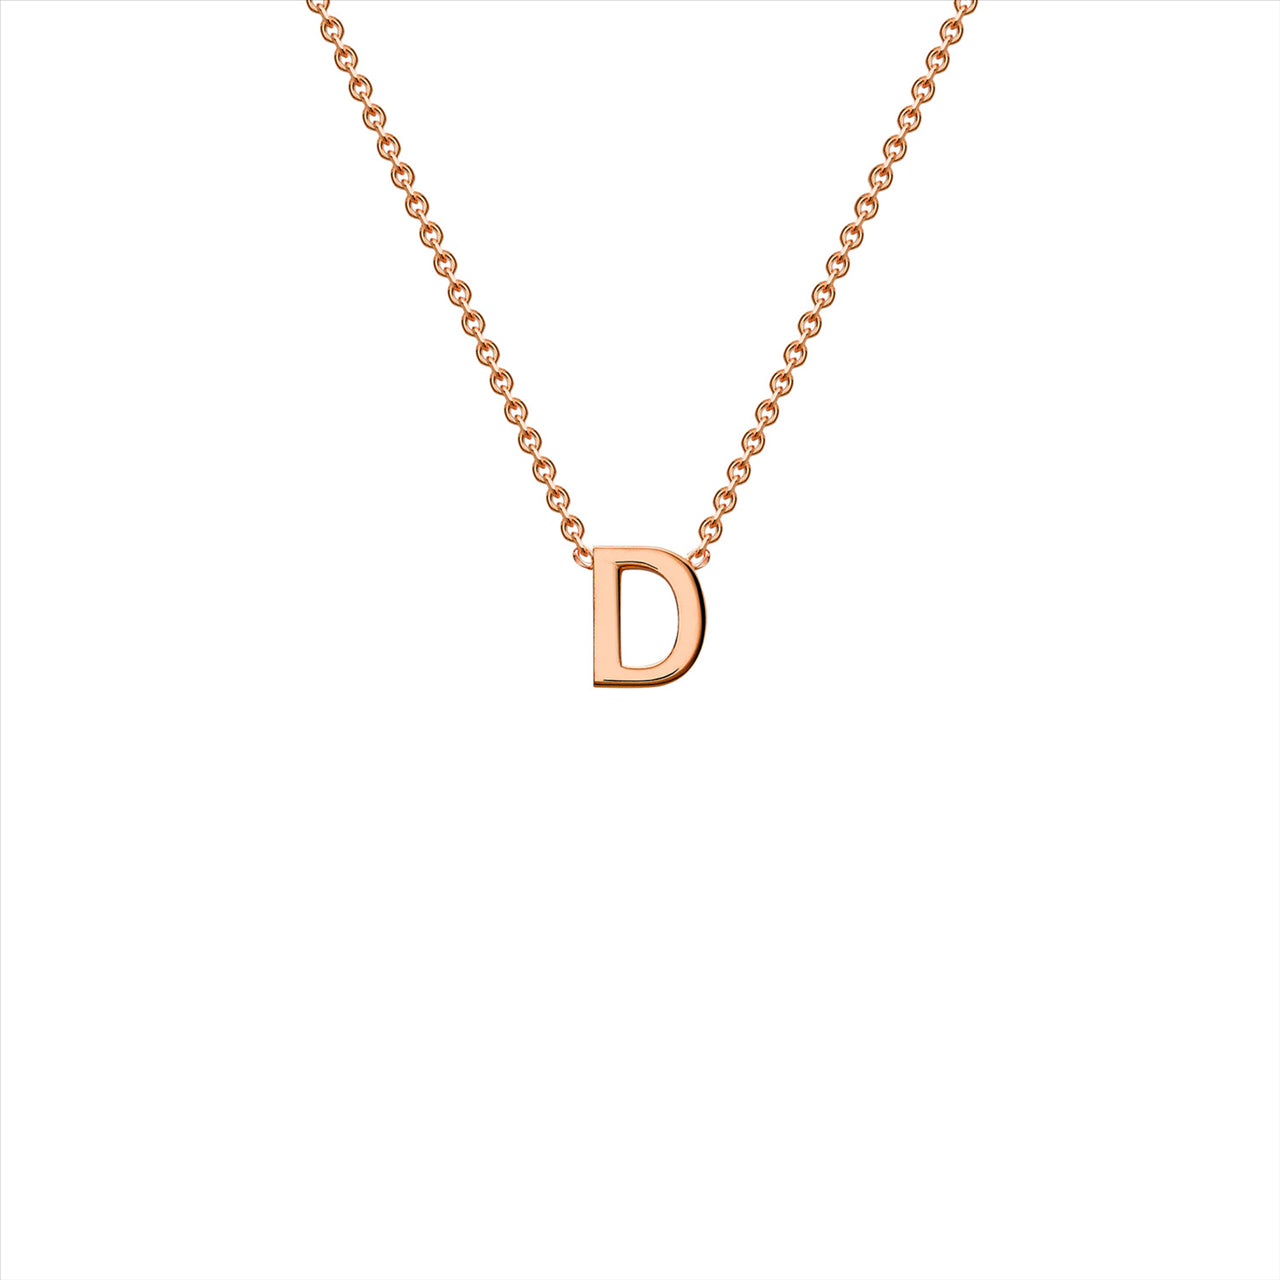 9 Carat White Gold Initial 'D'